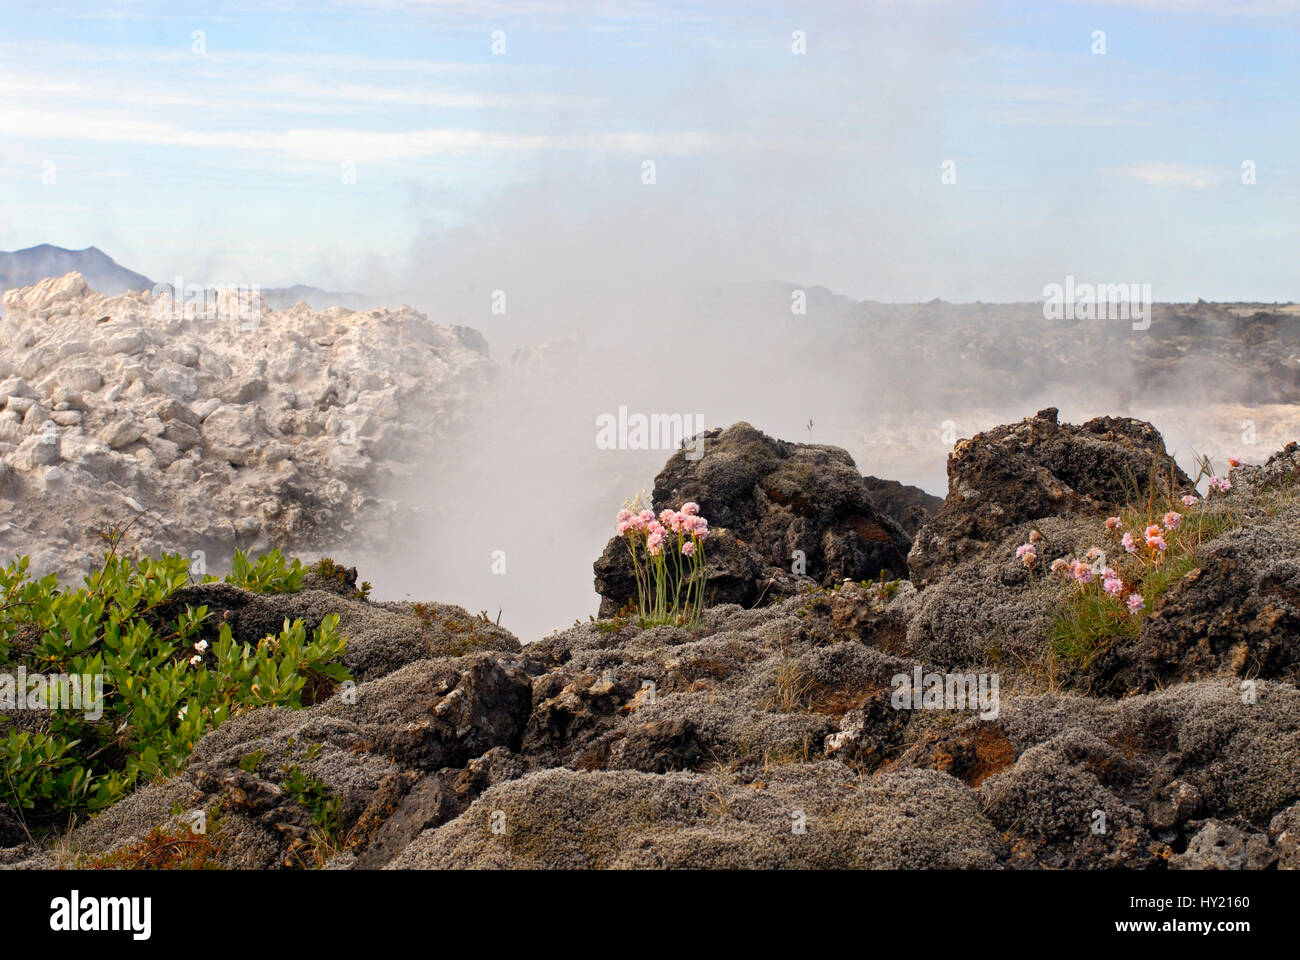 Stock Photo of rare flower vegetation in a volcano landscape at the turquoise Blue Lagoon Hot Spring in Iceland. Stock Photo